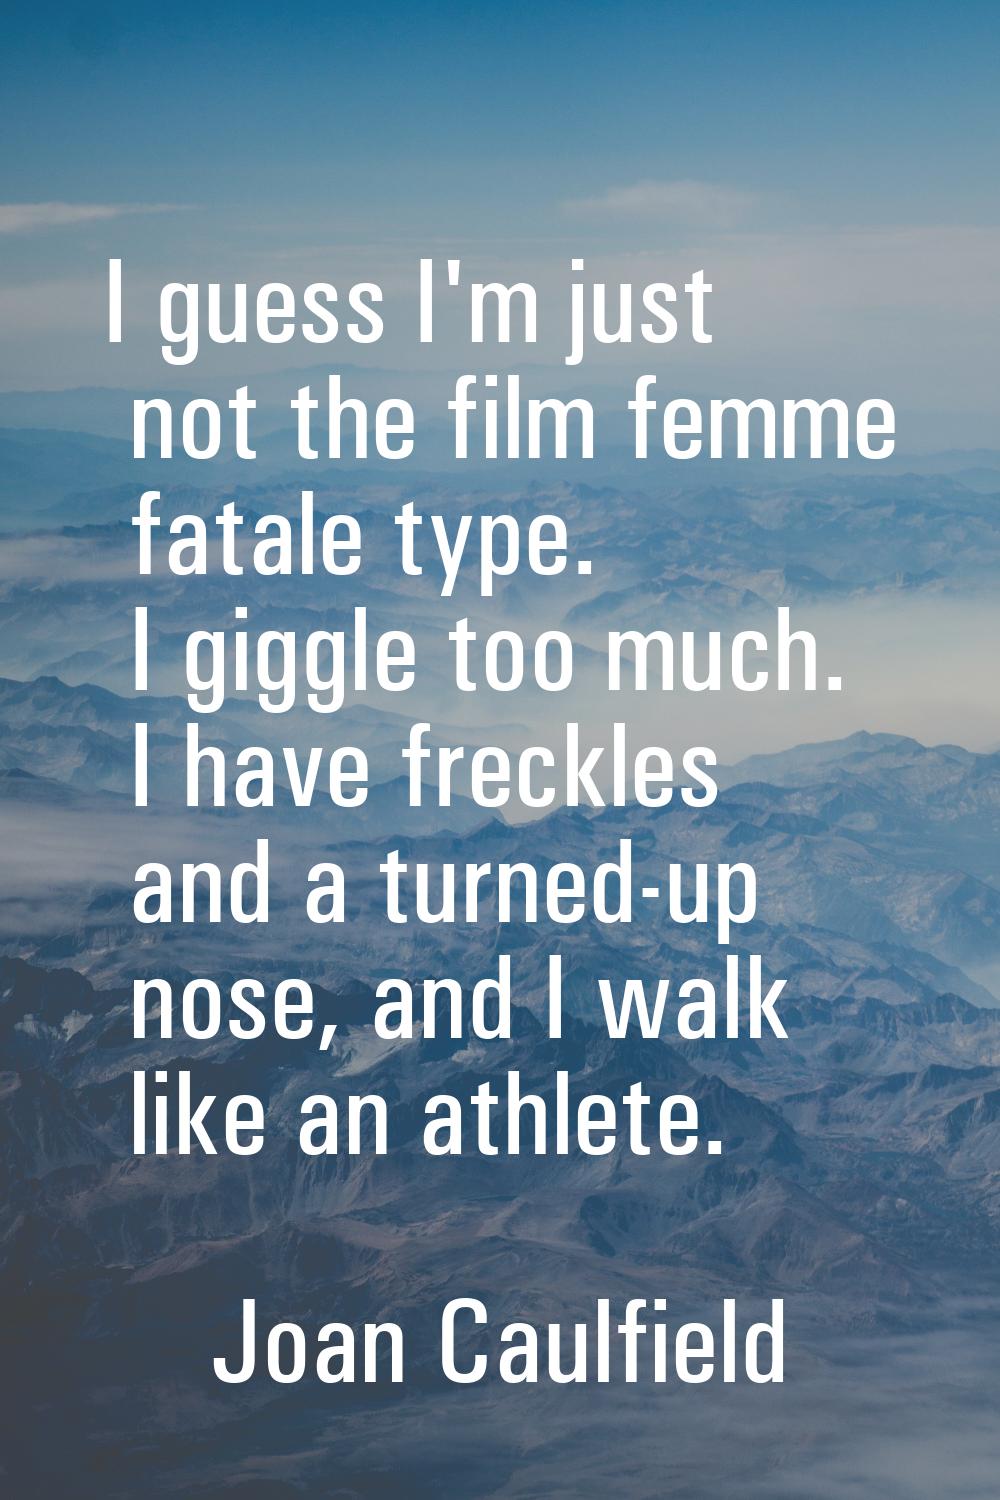 I guess I'm just not the film femme fatale type. I giggle too much. I have freckles and a turned-up